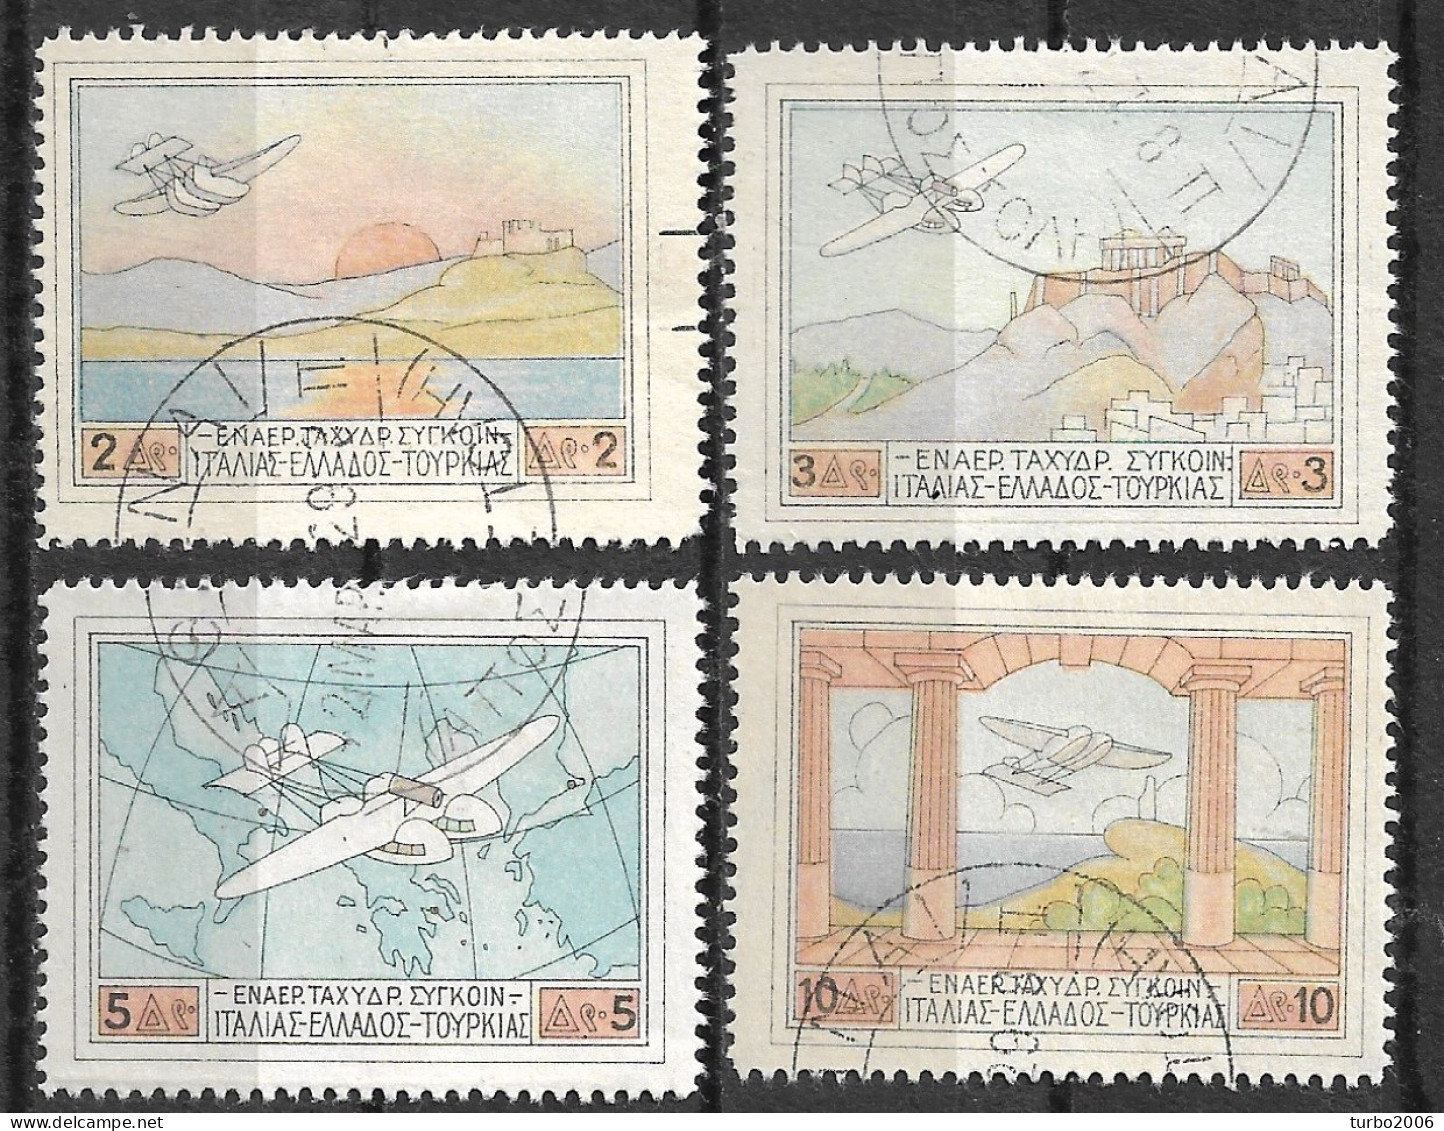 GREECE 1926 Airmail Patagonia Complete Used Set Vl. A 1 / 4 - Used Stamps